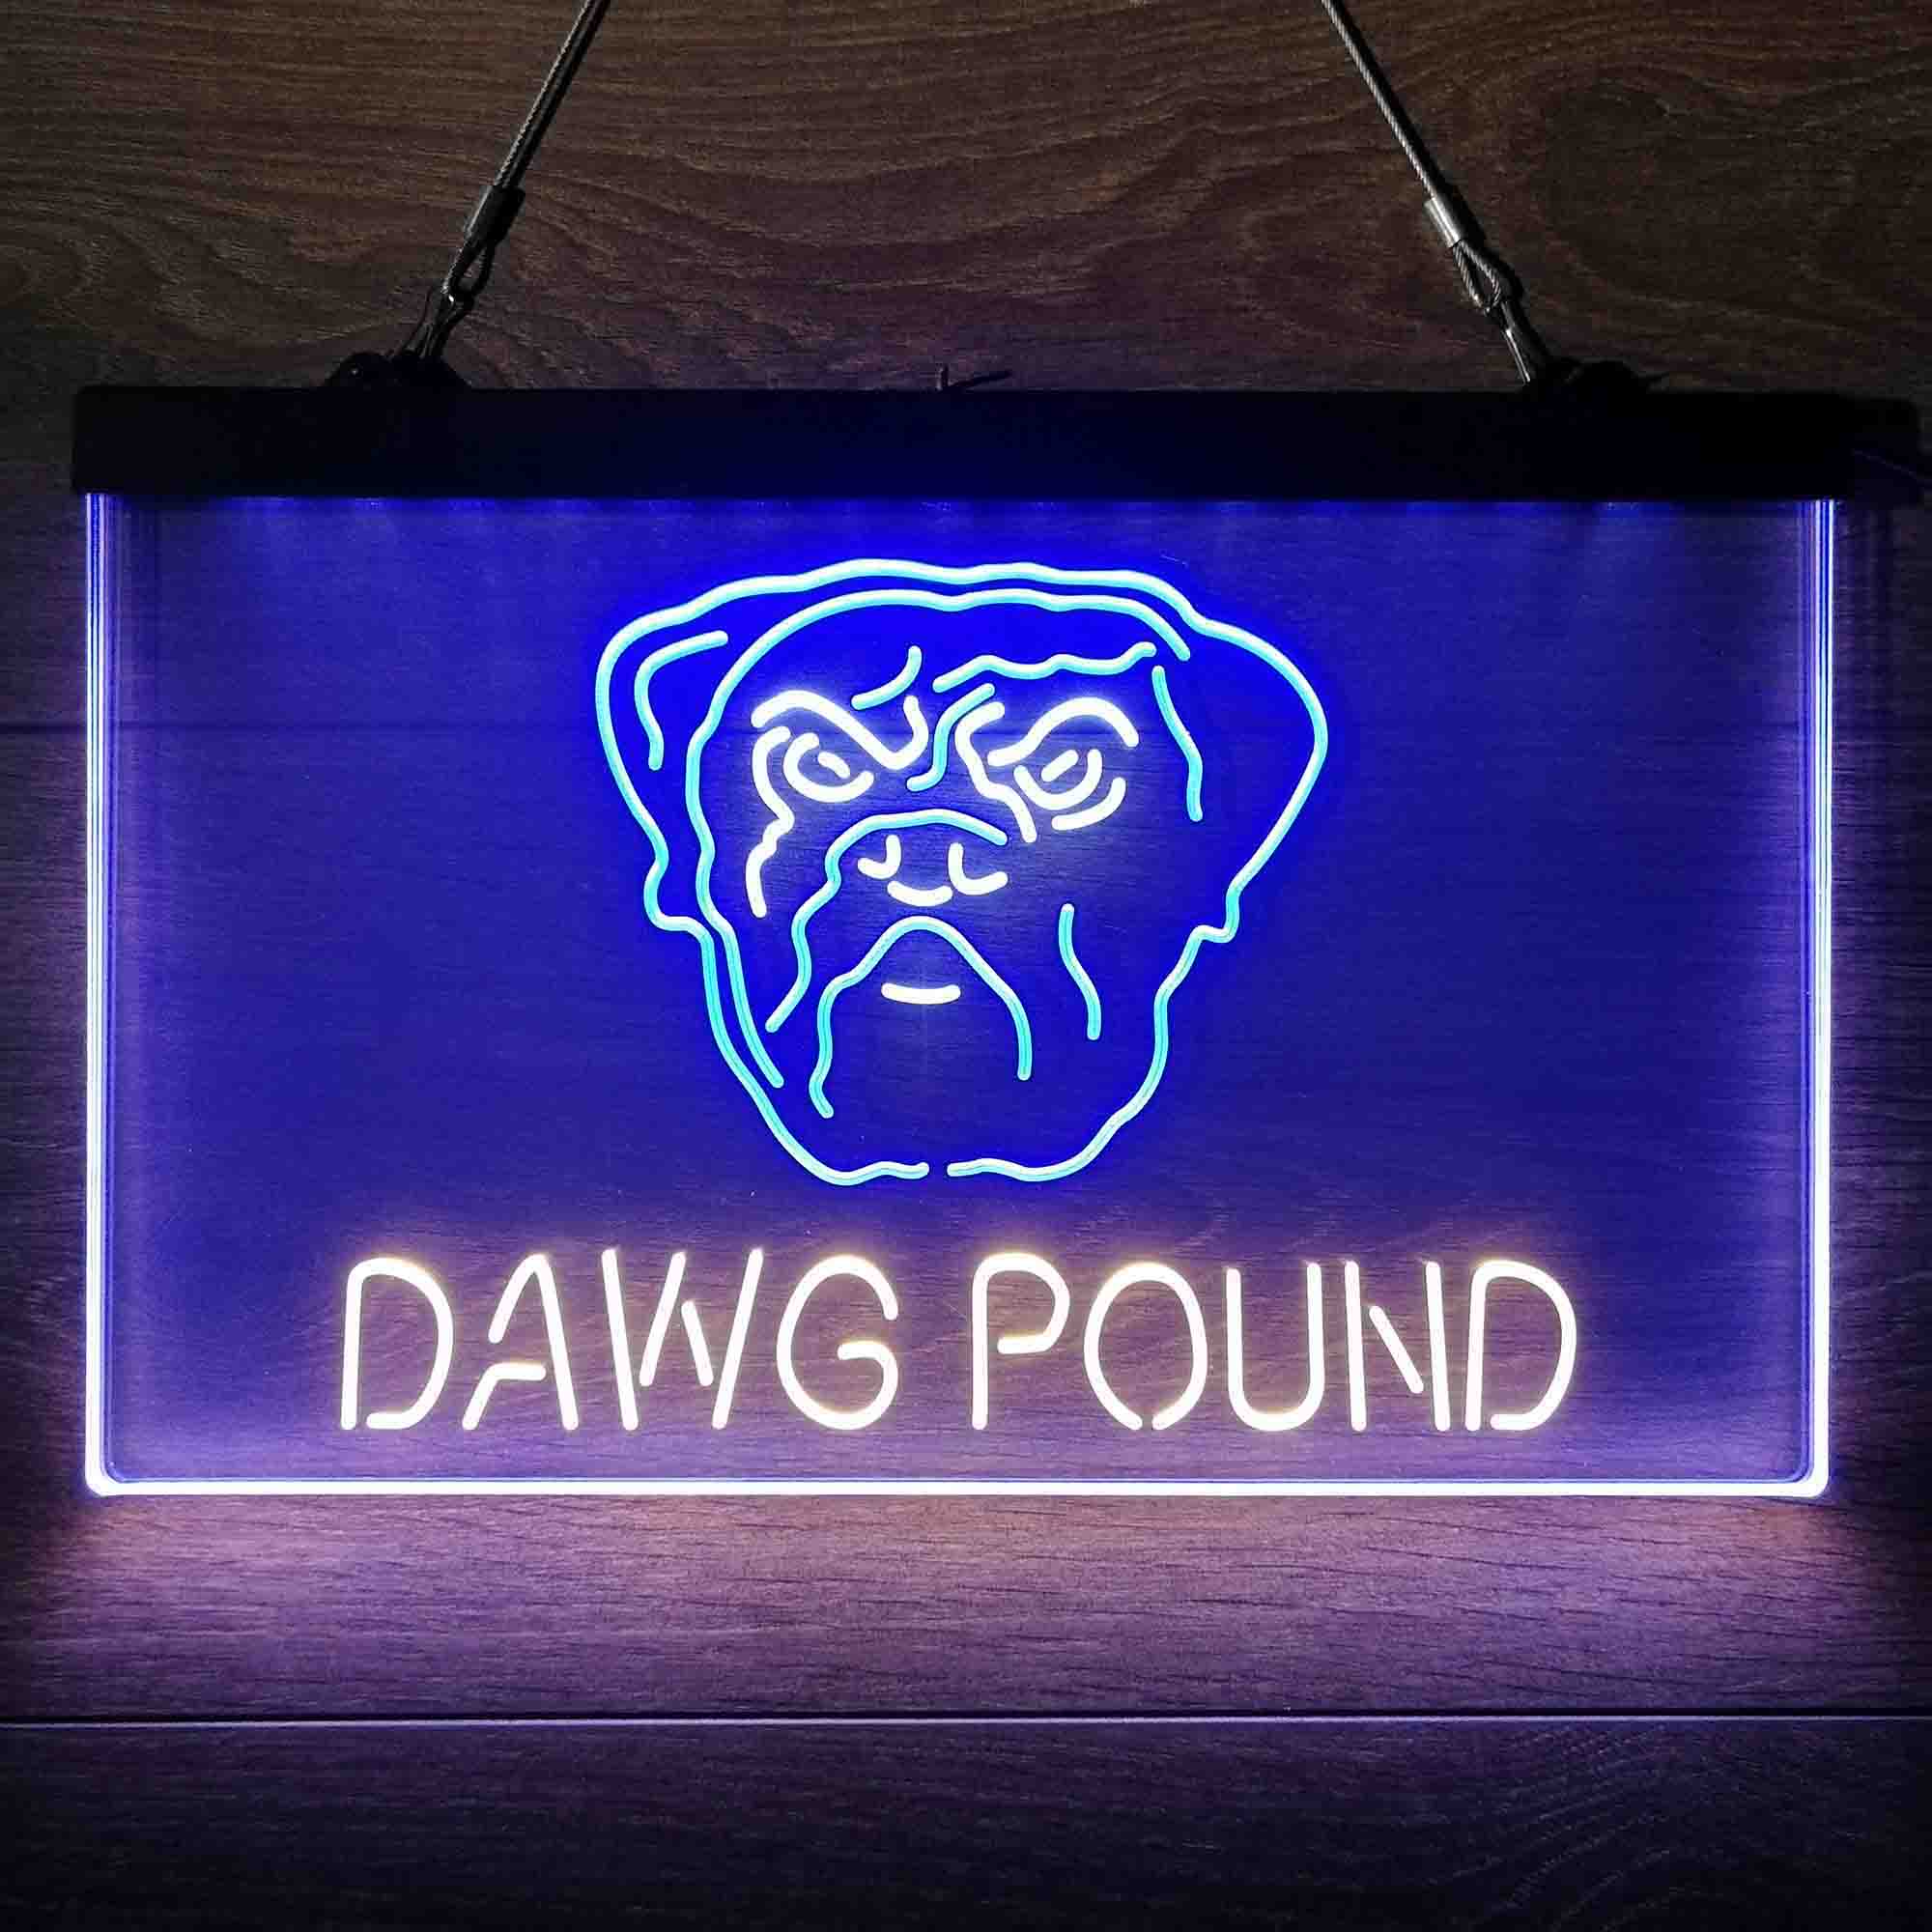 Dawg Pound Cleveland Browns Neon Light LED Sign